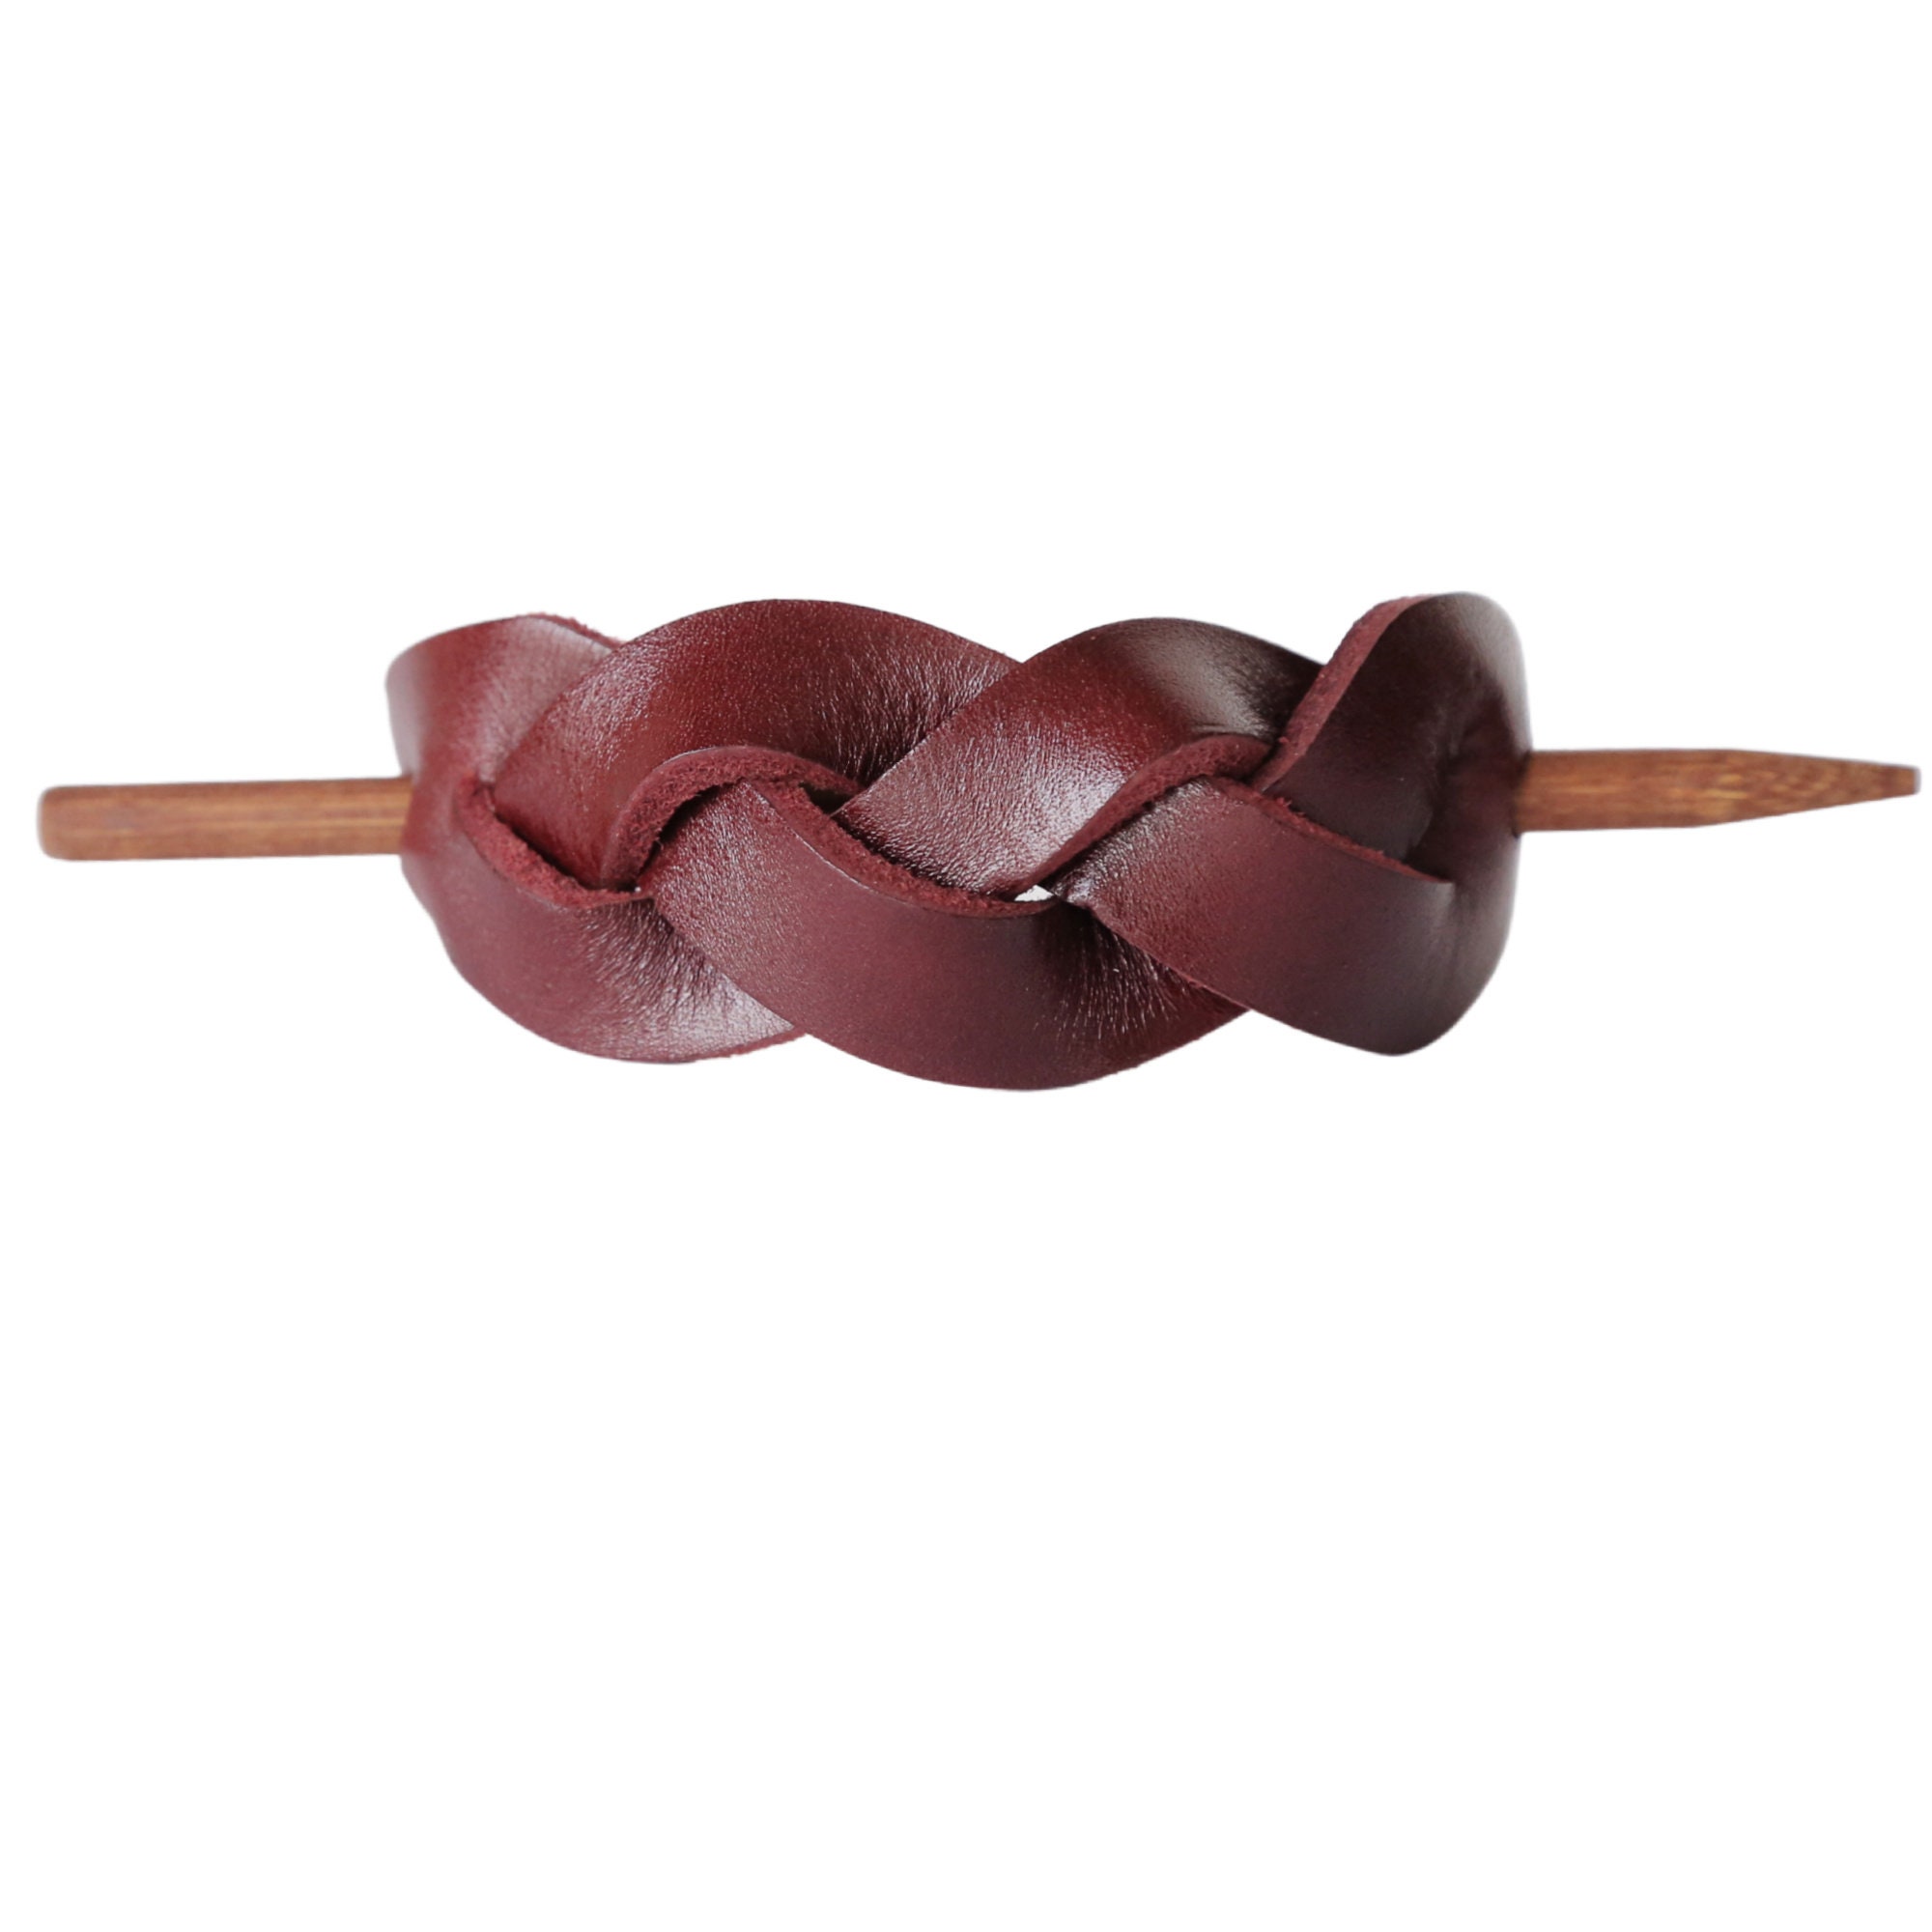 At håndtere Bugt labyrint Burgundy Braided Leather Stick Barrette Twisted Leather Hair - Etsy